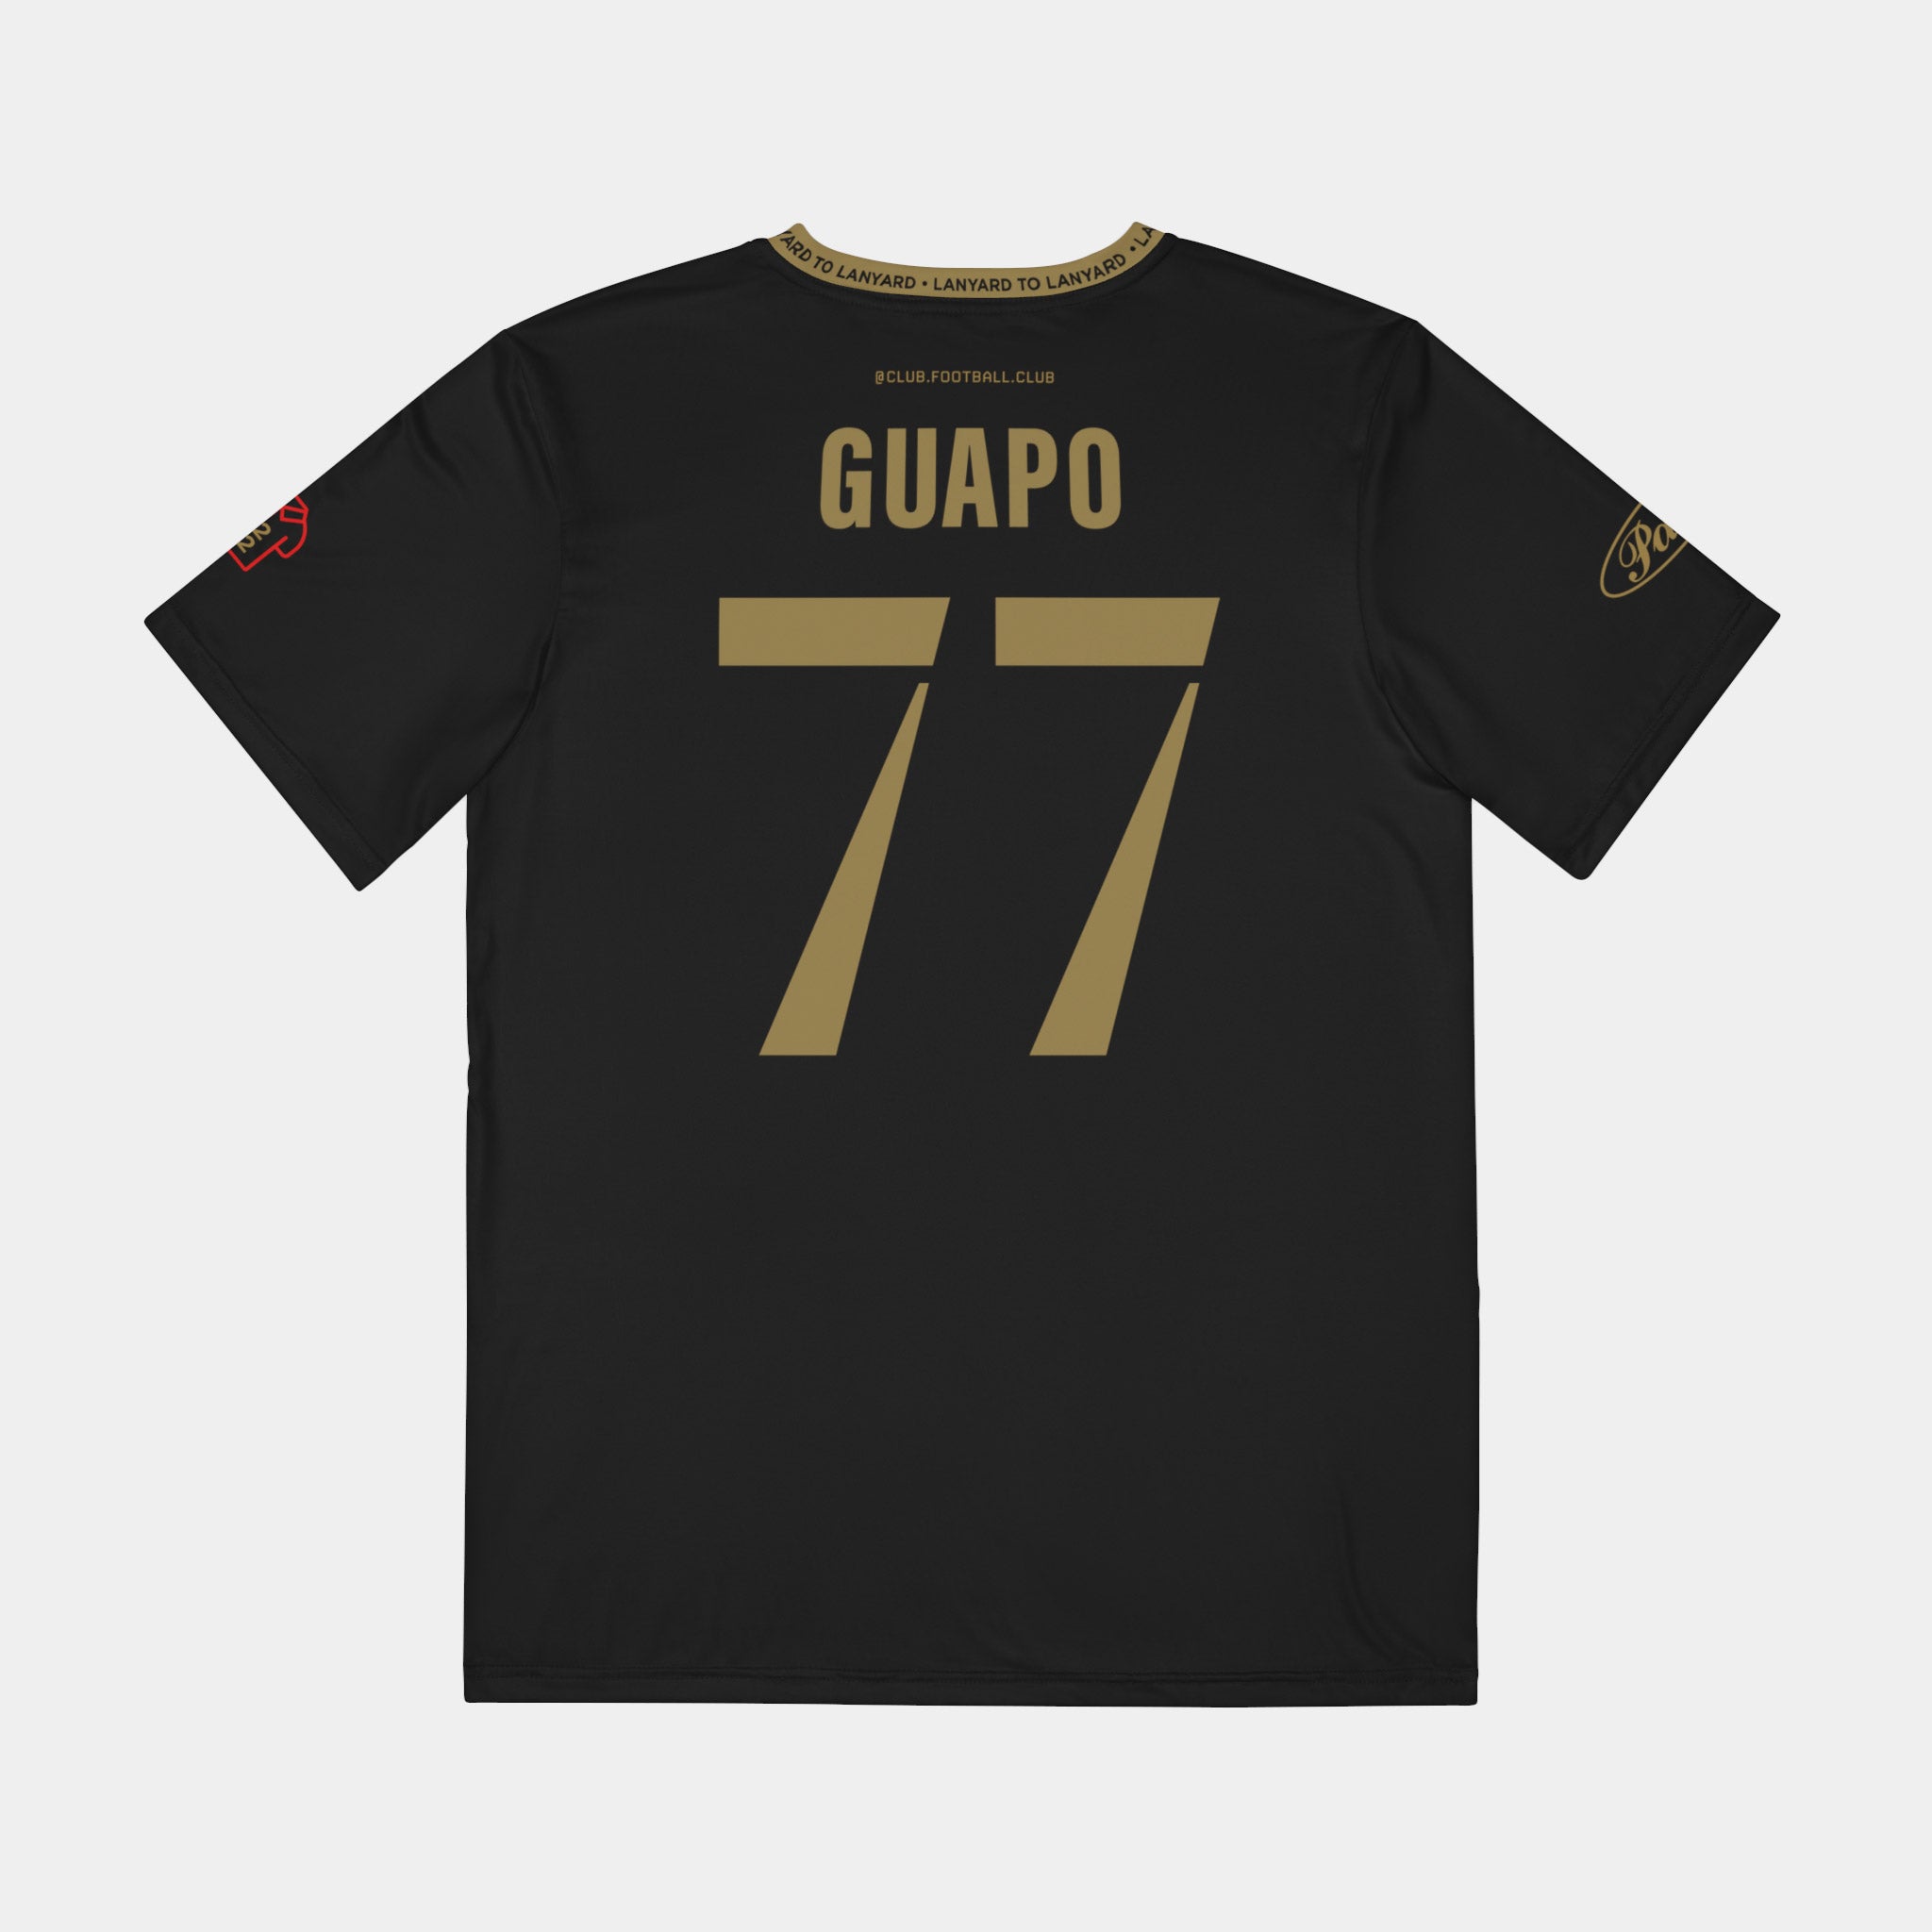 Guapo Paul (LAFC) Special Edition Kit